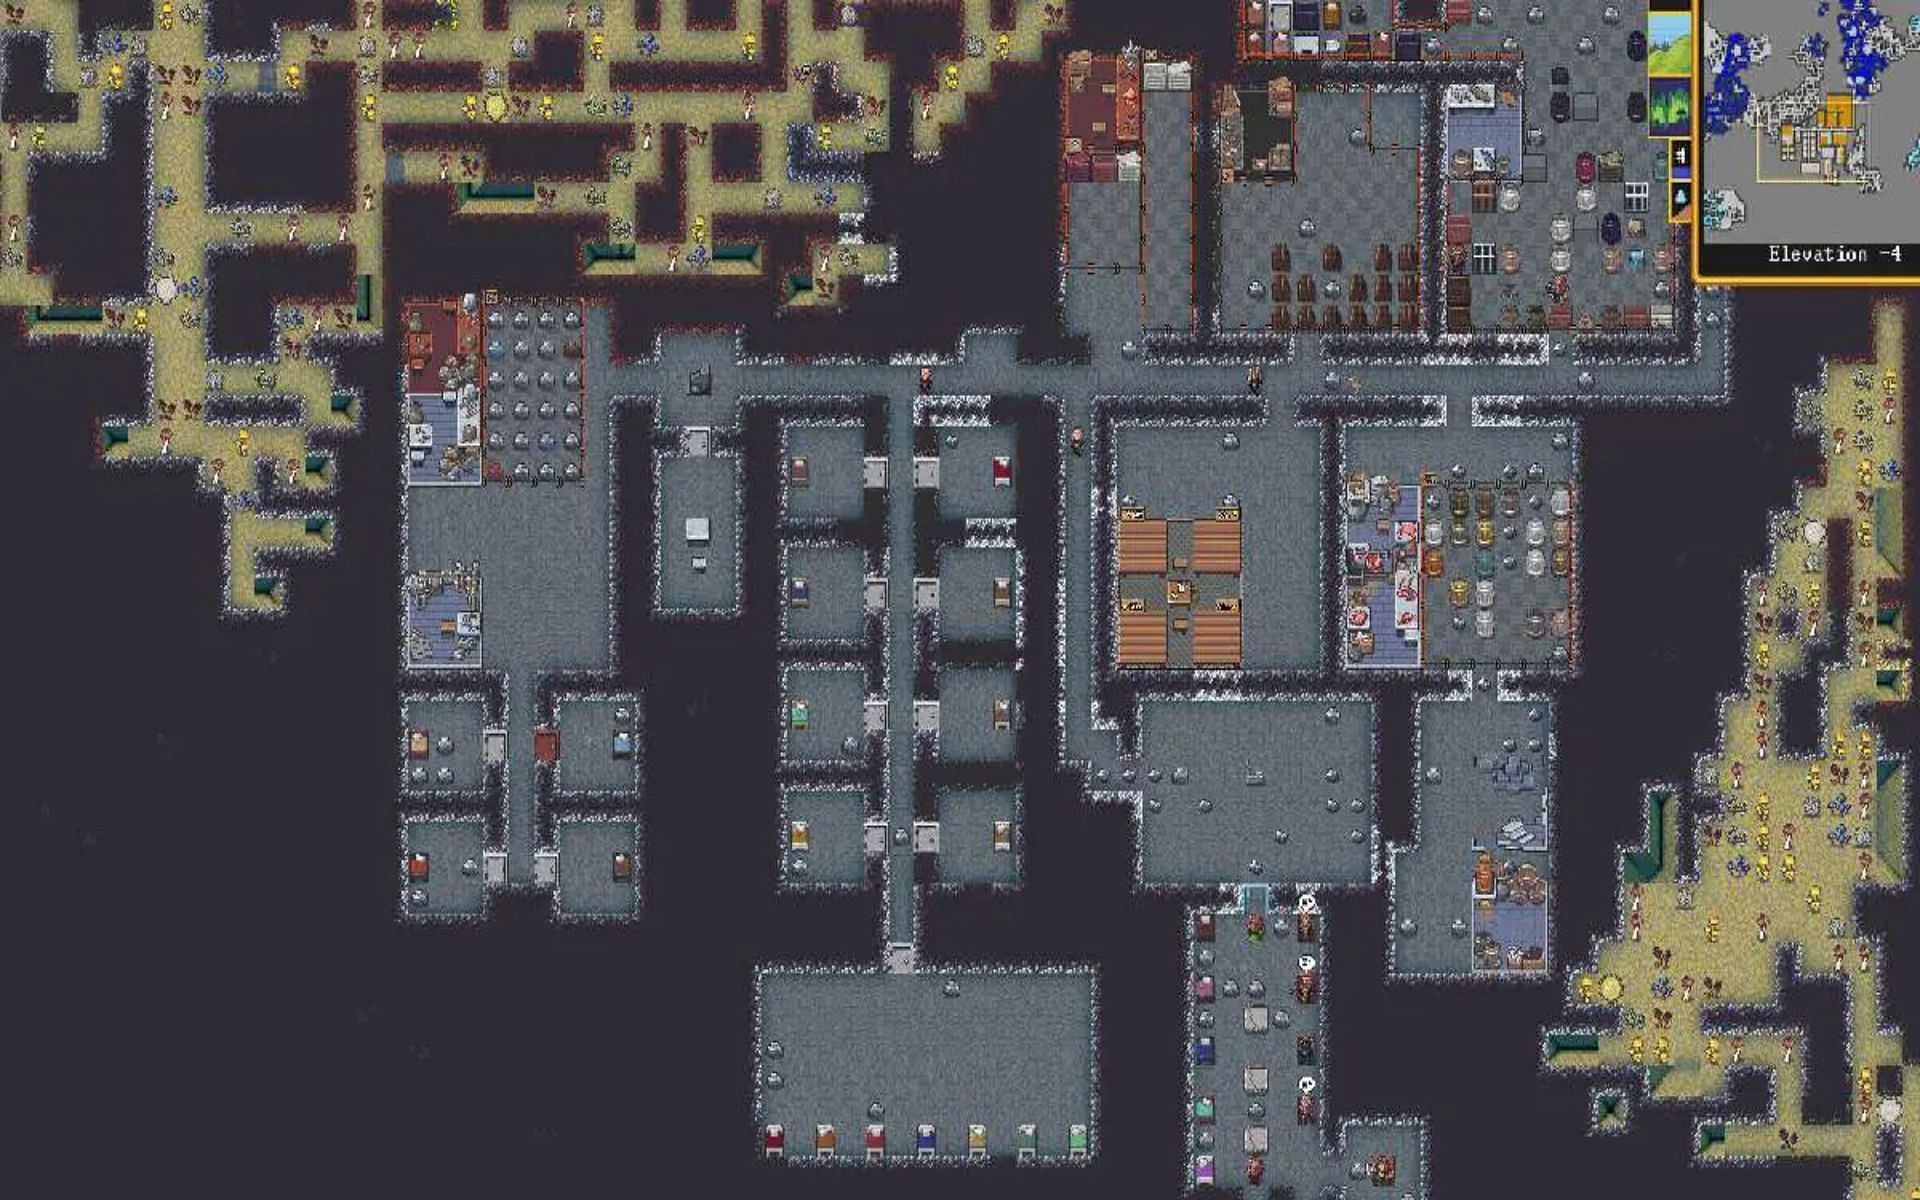 The game was based on others, such as Dwarf Fortress (Image via Reddit/u/Jahooli-)